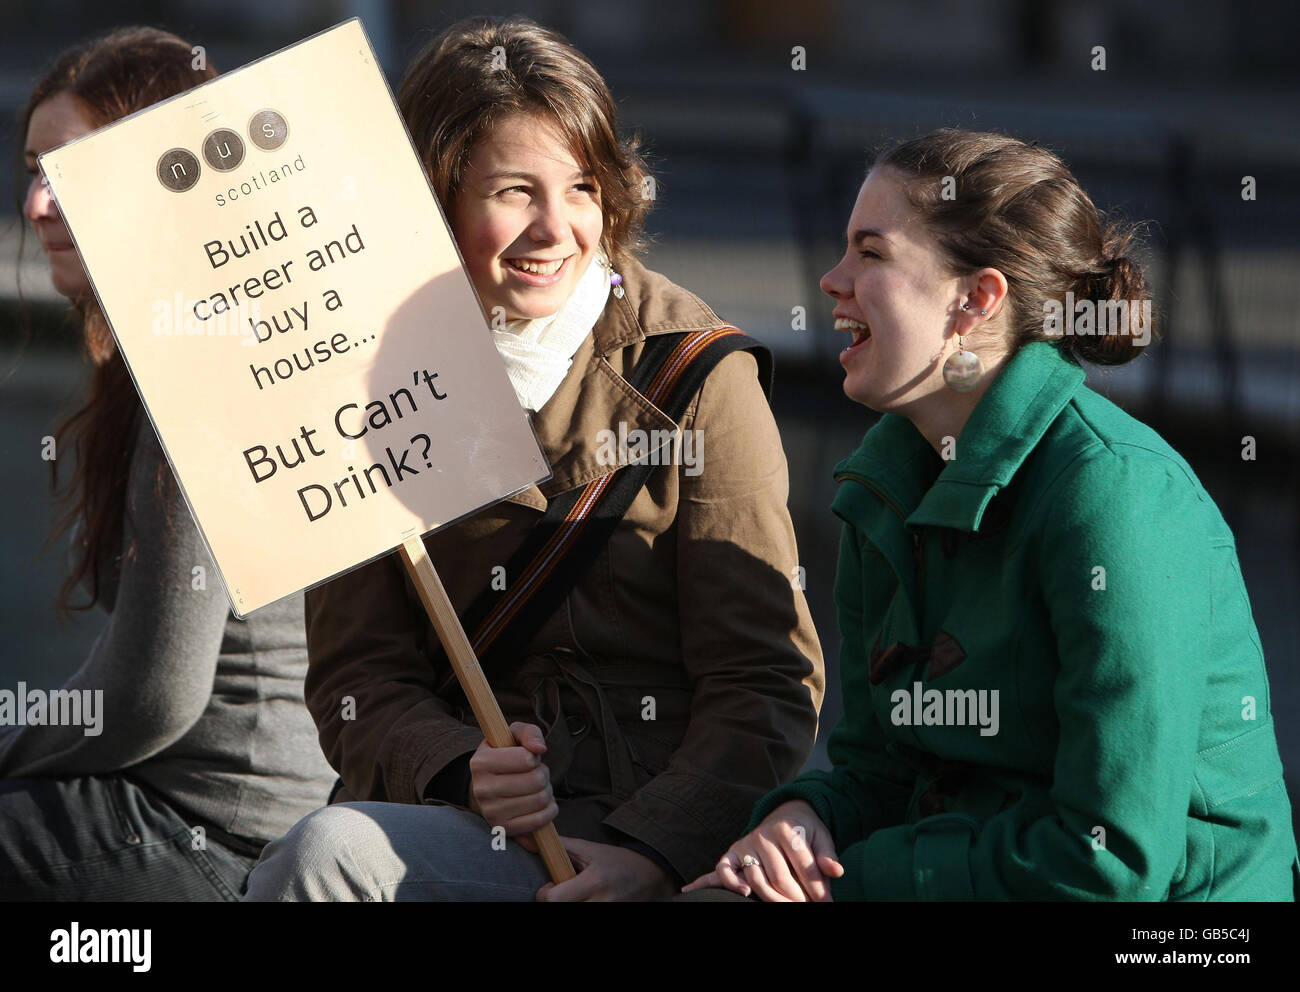 Students protest at alcohol sales plan Stock Photo